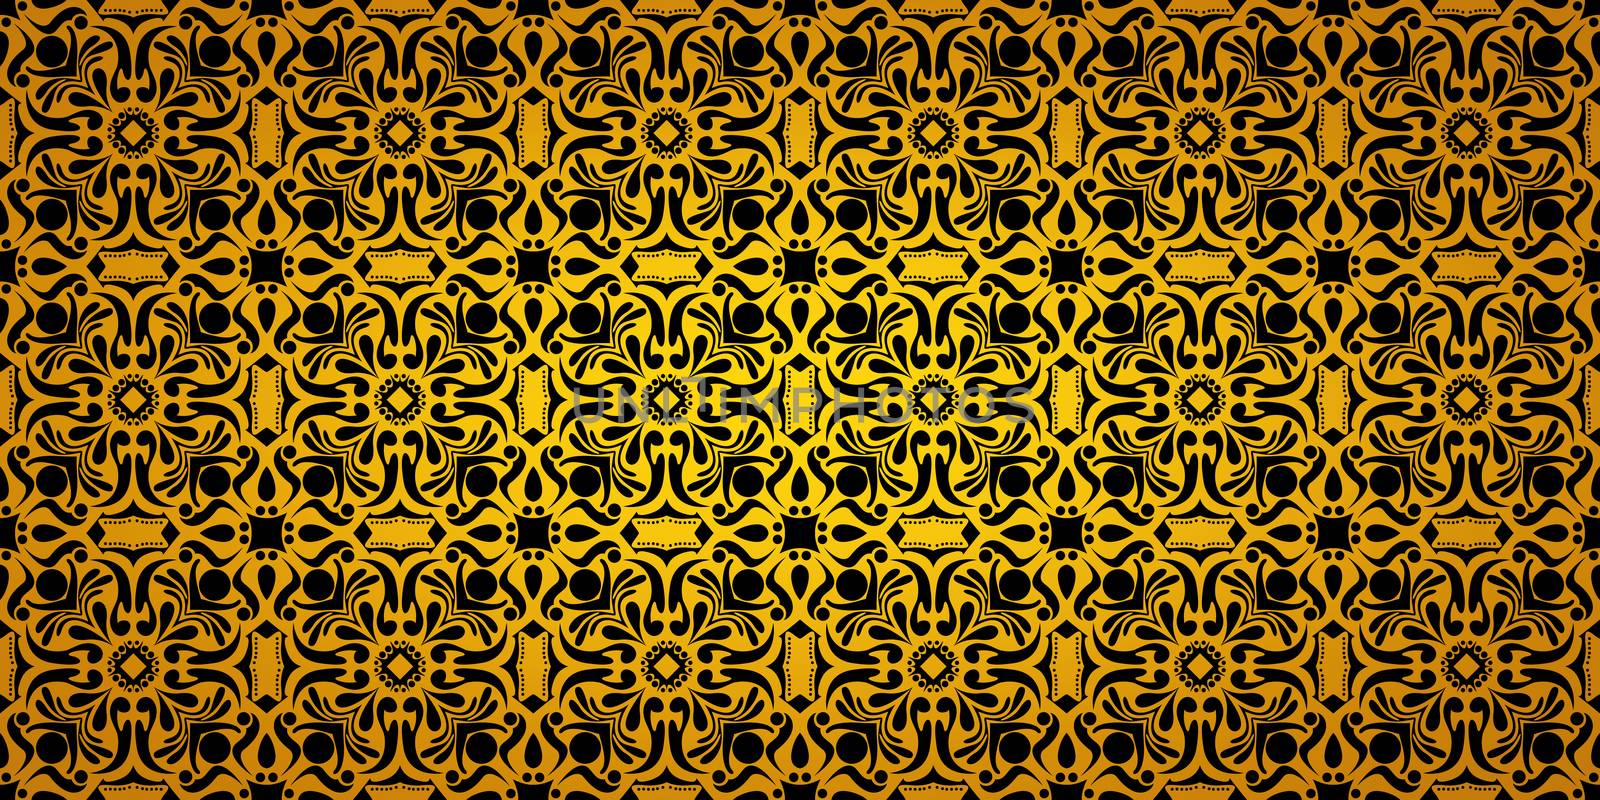 Seamless wide gradient pattern black and gold vintage floral background 